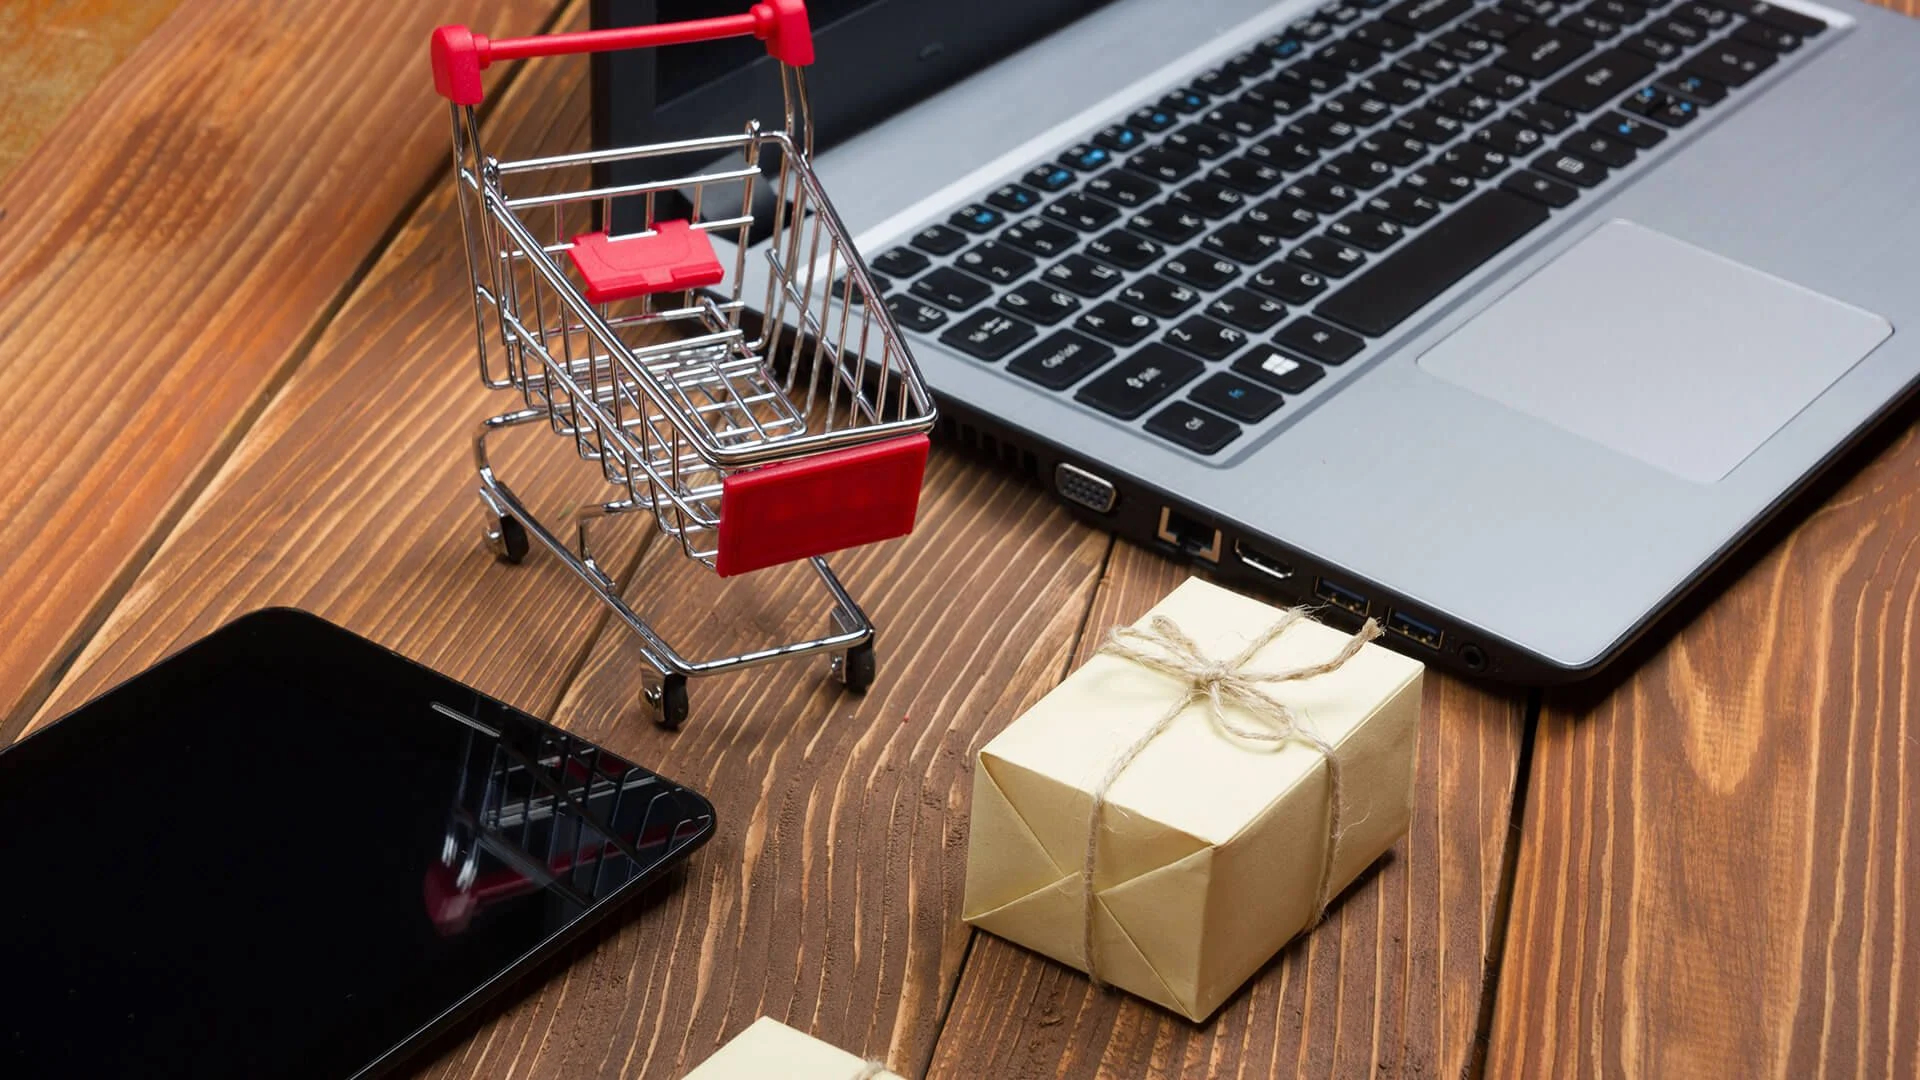  5 Big Benefits of Online Stores for Small Businesses